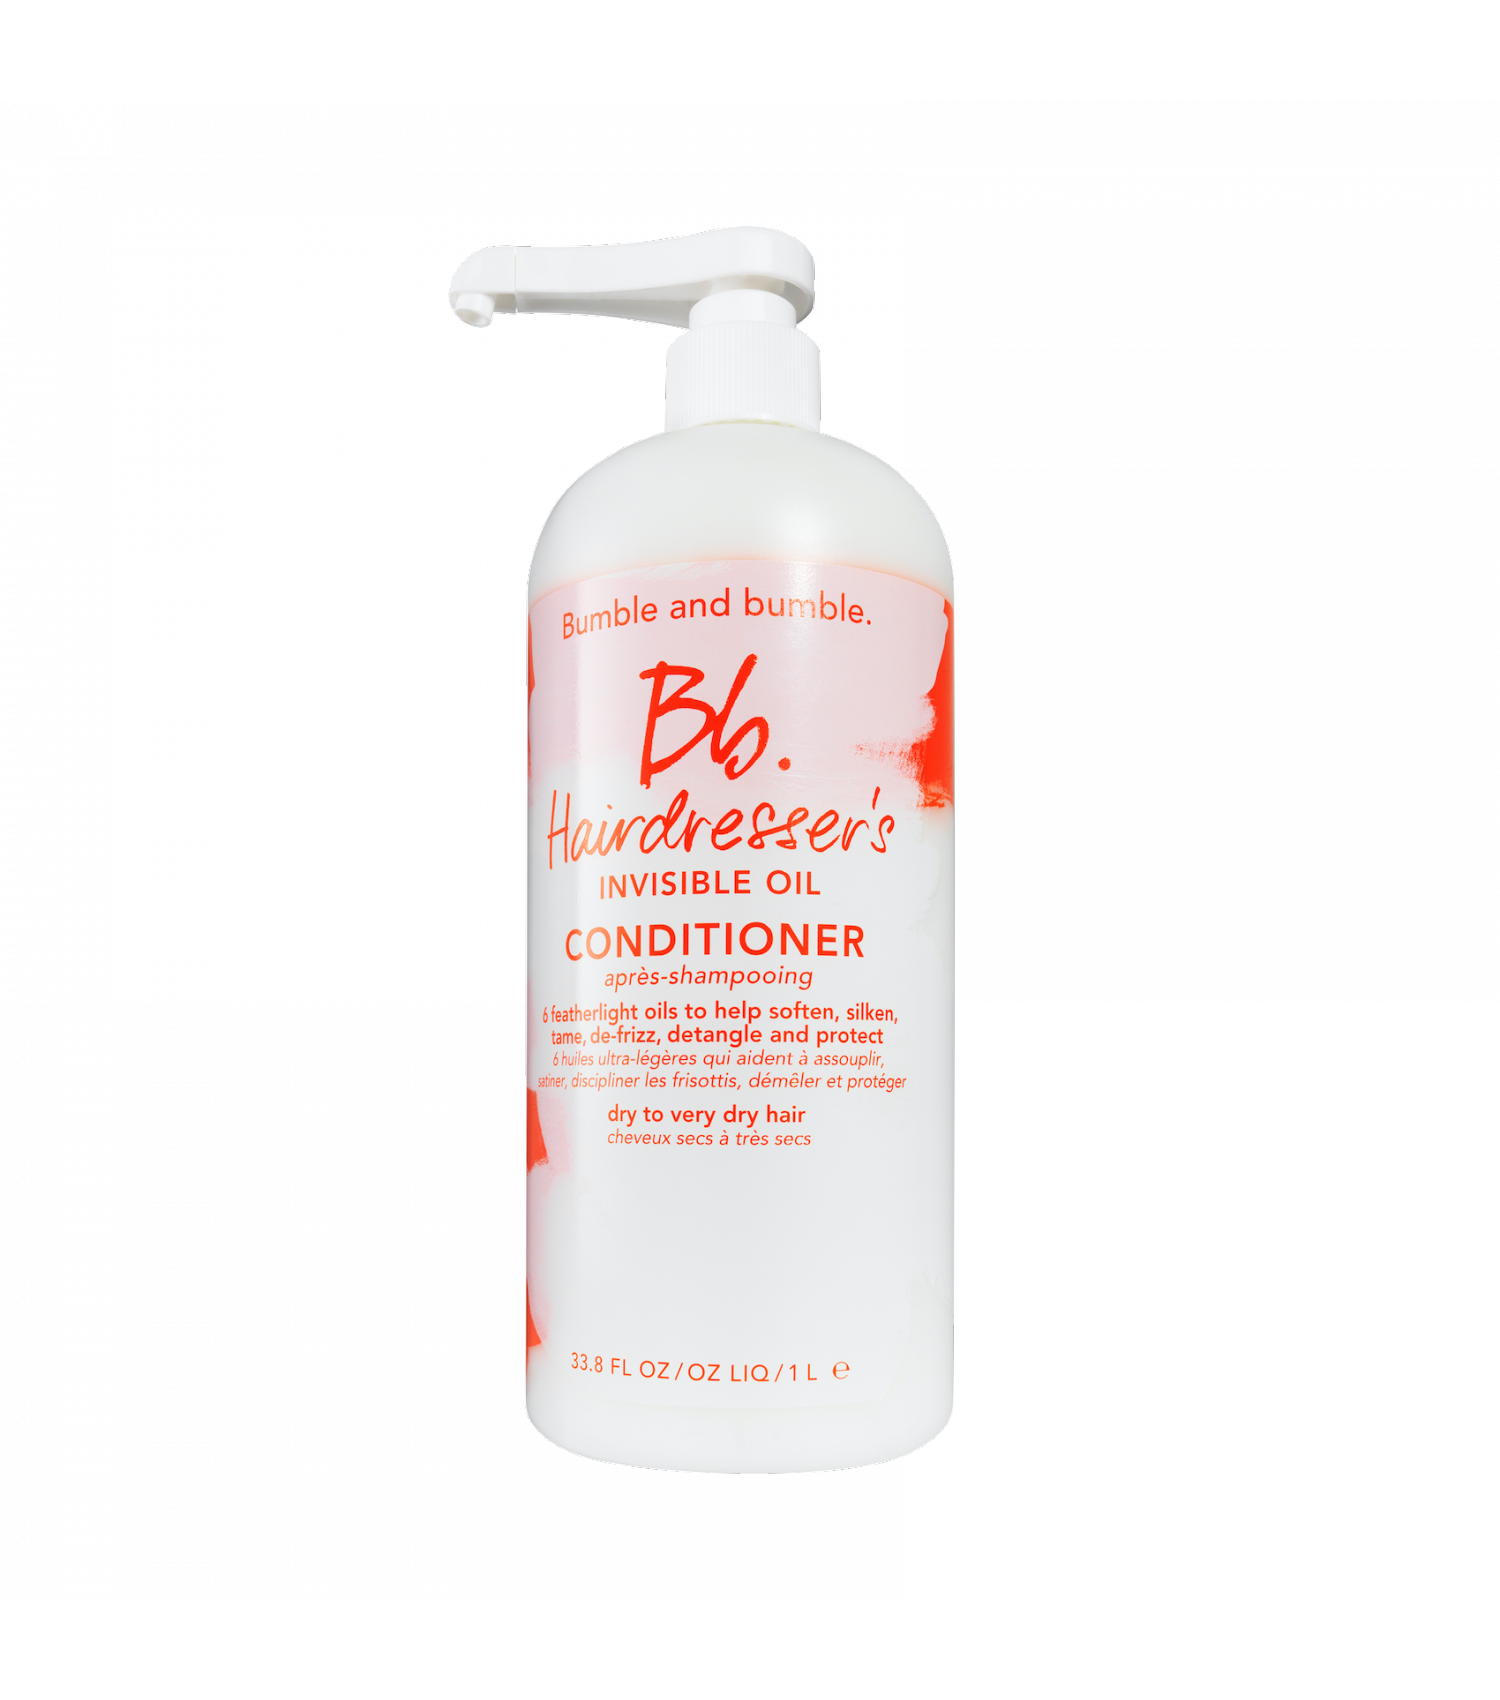 Bumble and bumble Hairdressers Invisible Oil Conditioner Liter Bumble and bumble Hairdressers Invisible Oil Conditioner Liter 1